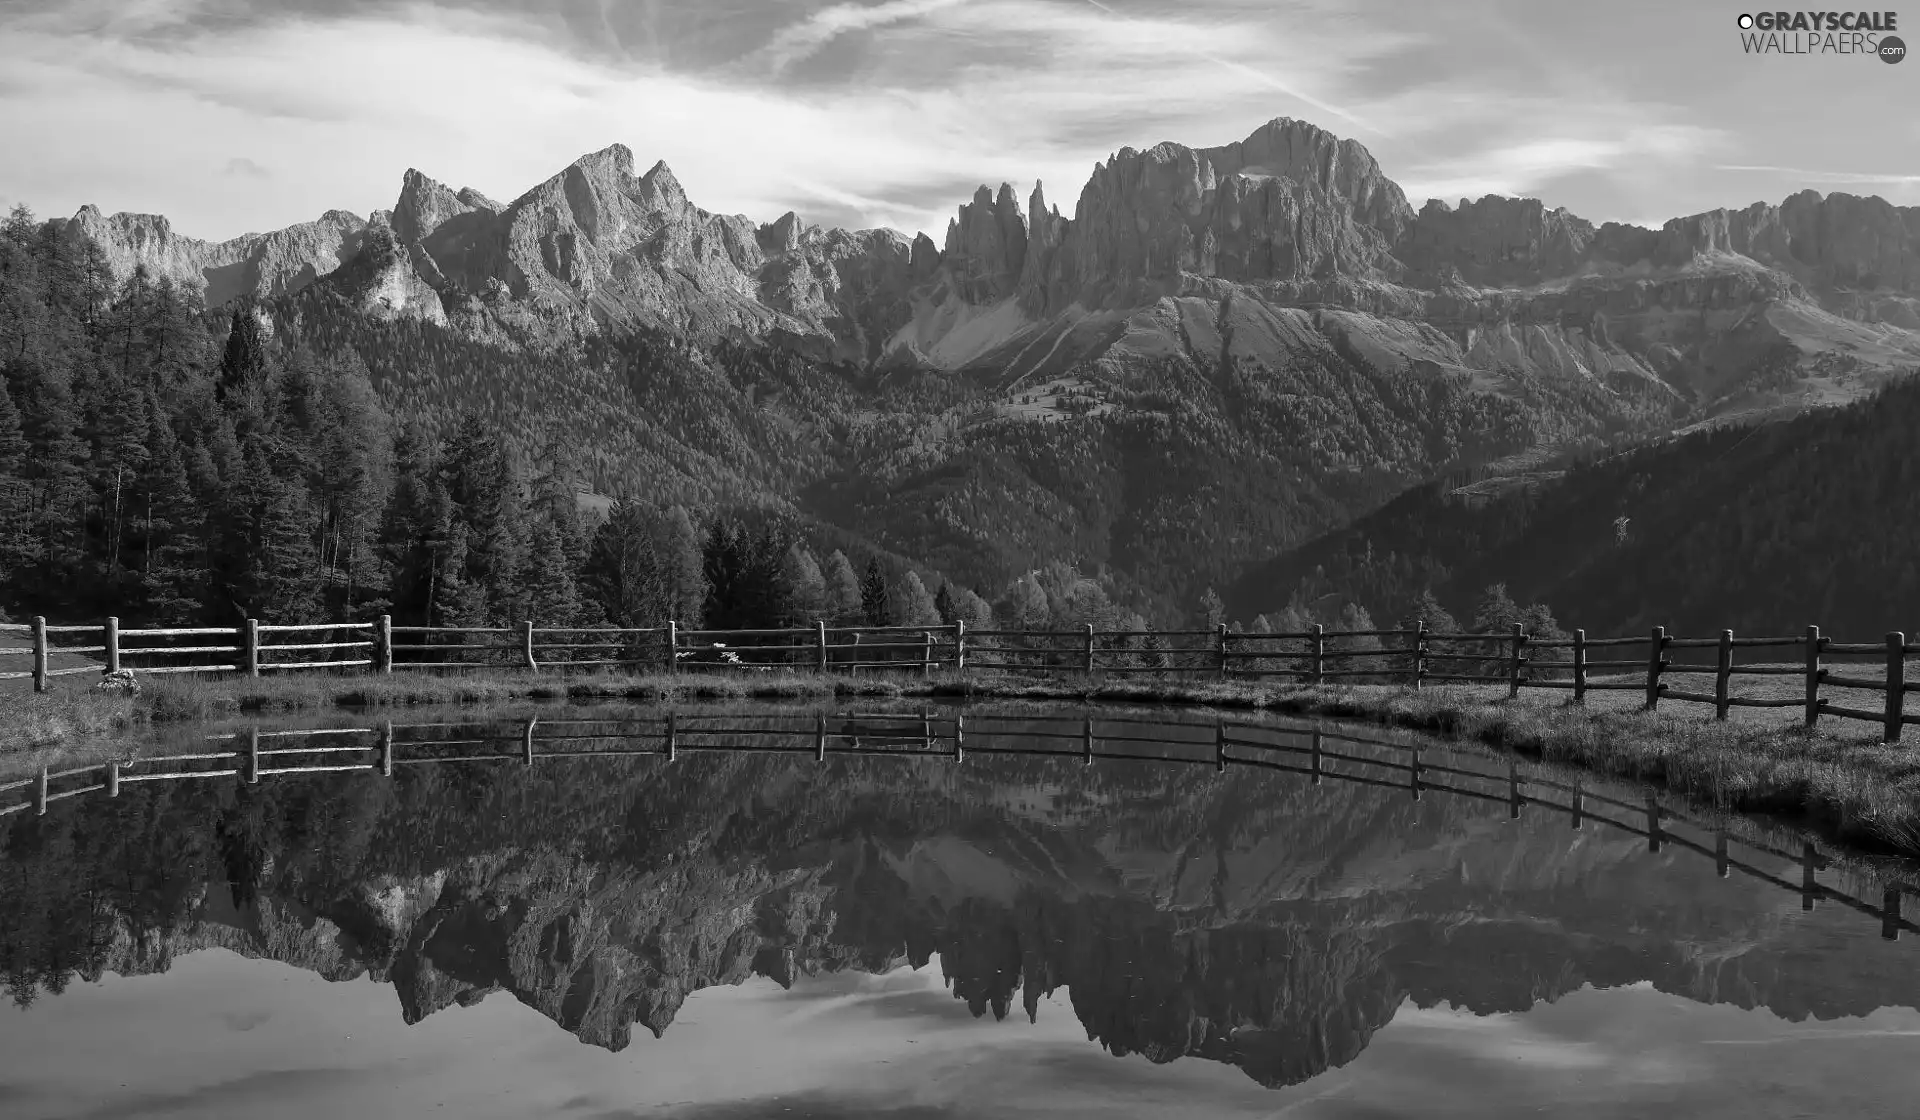 Dolomites, Mountains, Pond - car, fence, reflection, Italy, viewes, clouds, trees